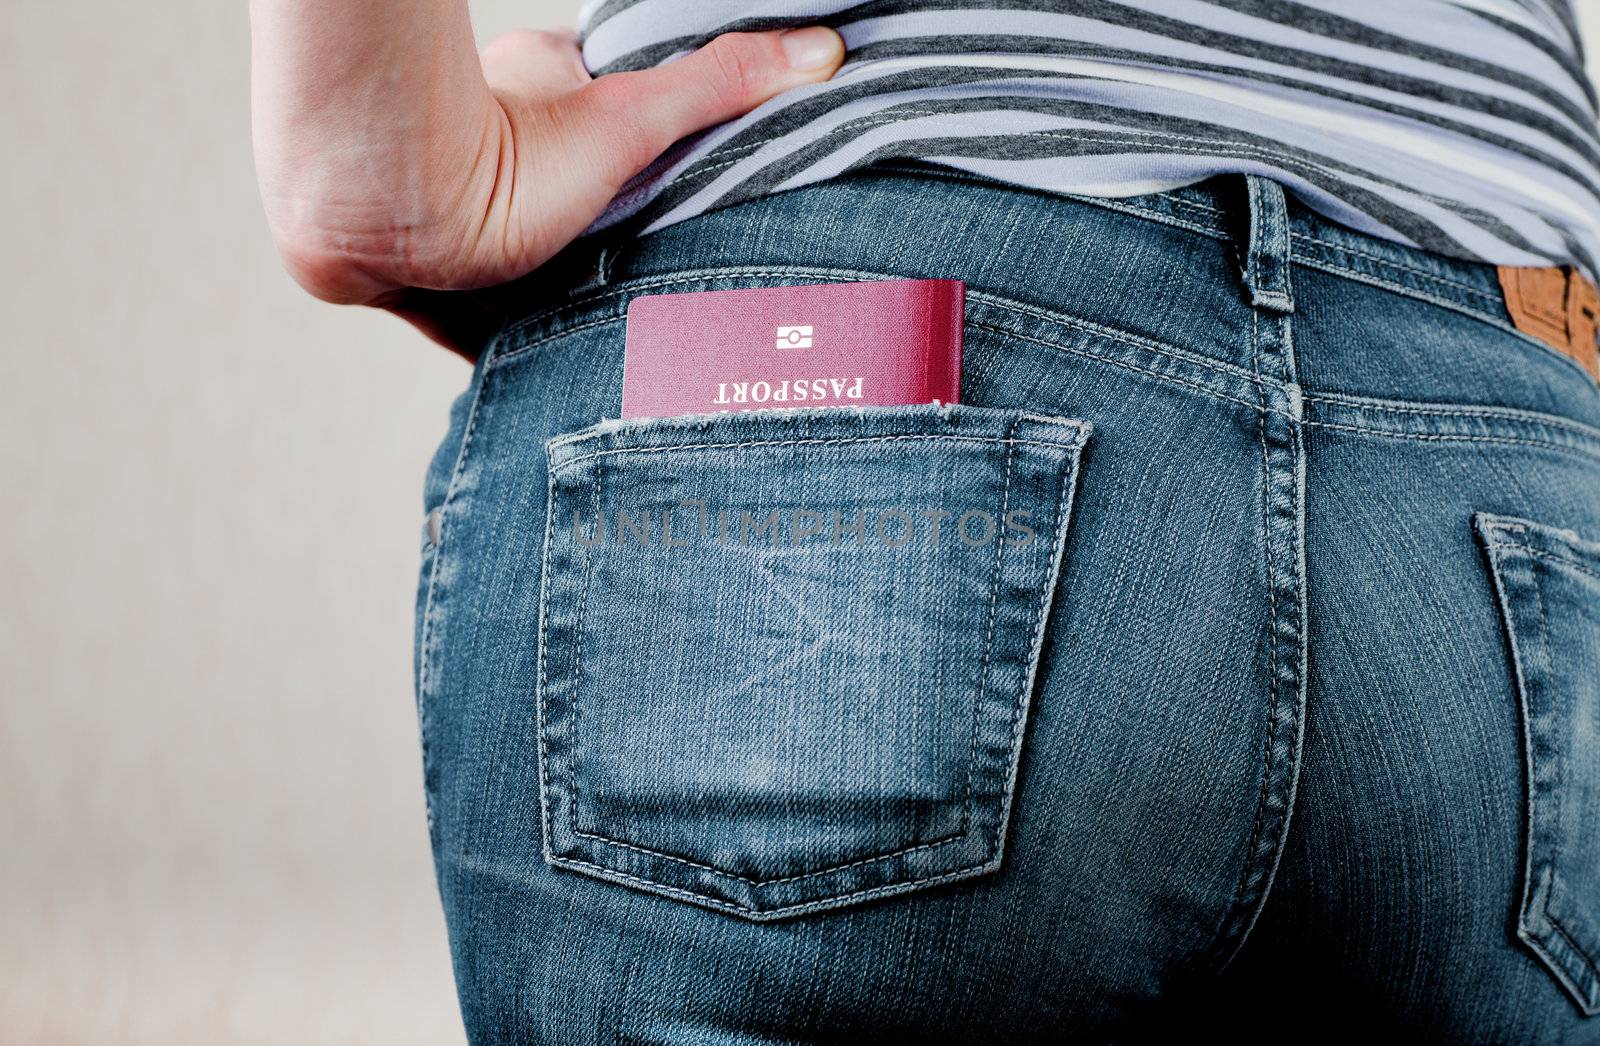 Passport in a back pocket of jeans